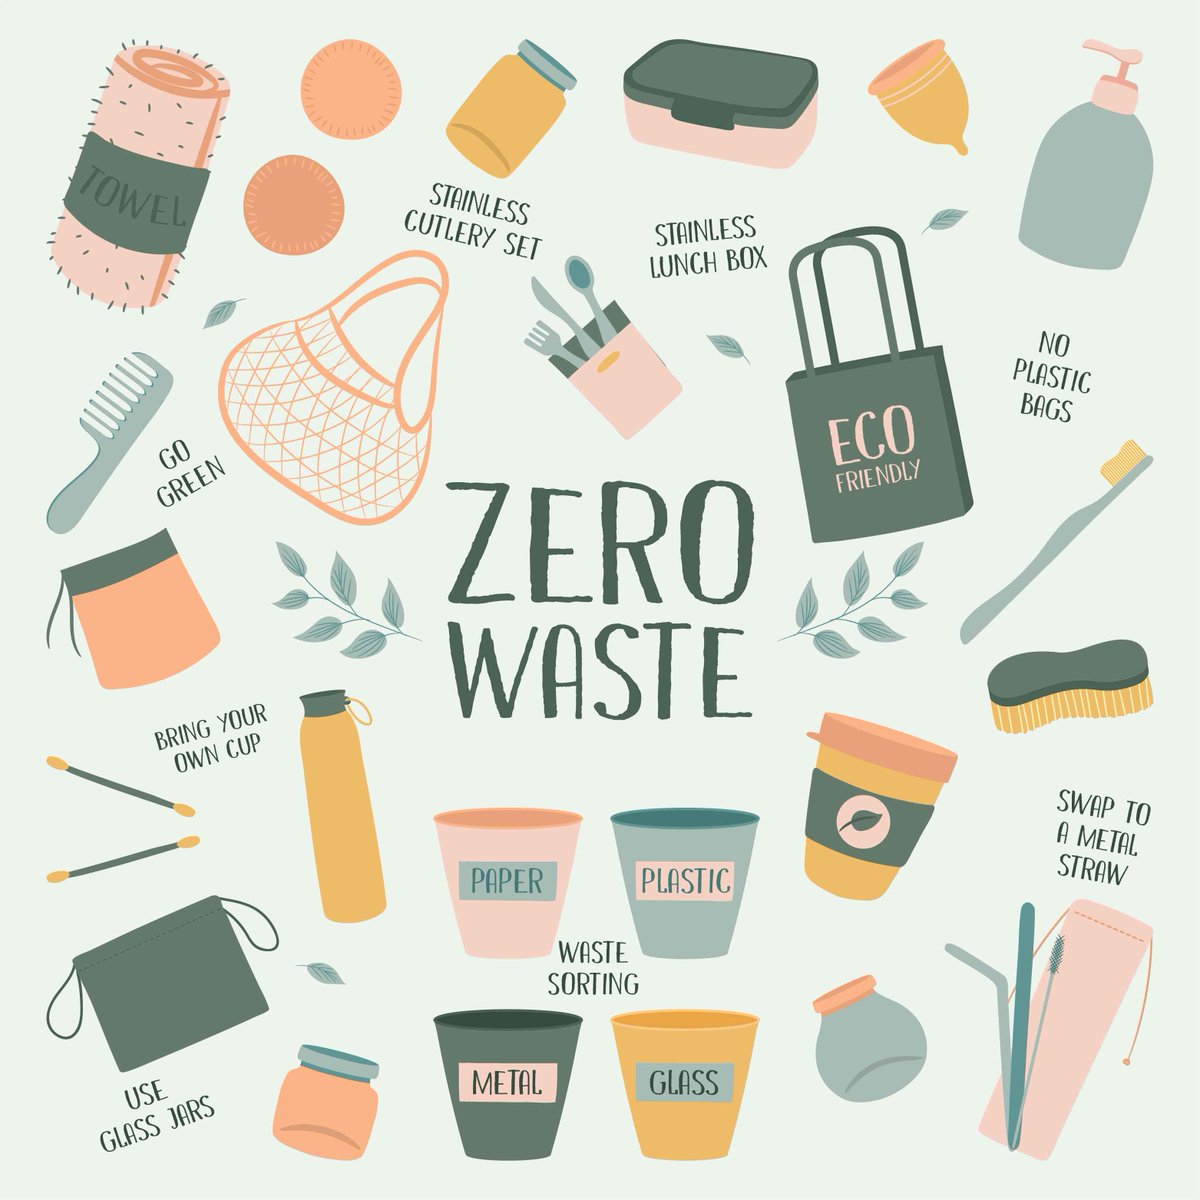 🍀🍀💚💚Reducing, Reusing and Recycling can be a key part of a climate change!!🍀🍀💚💚

ecozonelifestyle.com

#ecofriendlyproducts #plasticproject #plasticfreeliving #zerowastehome #ecoblogger #zerowasteliving #naturalskincare #plasticfreeforever #zerowastecollective